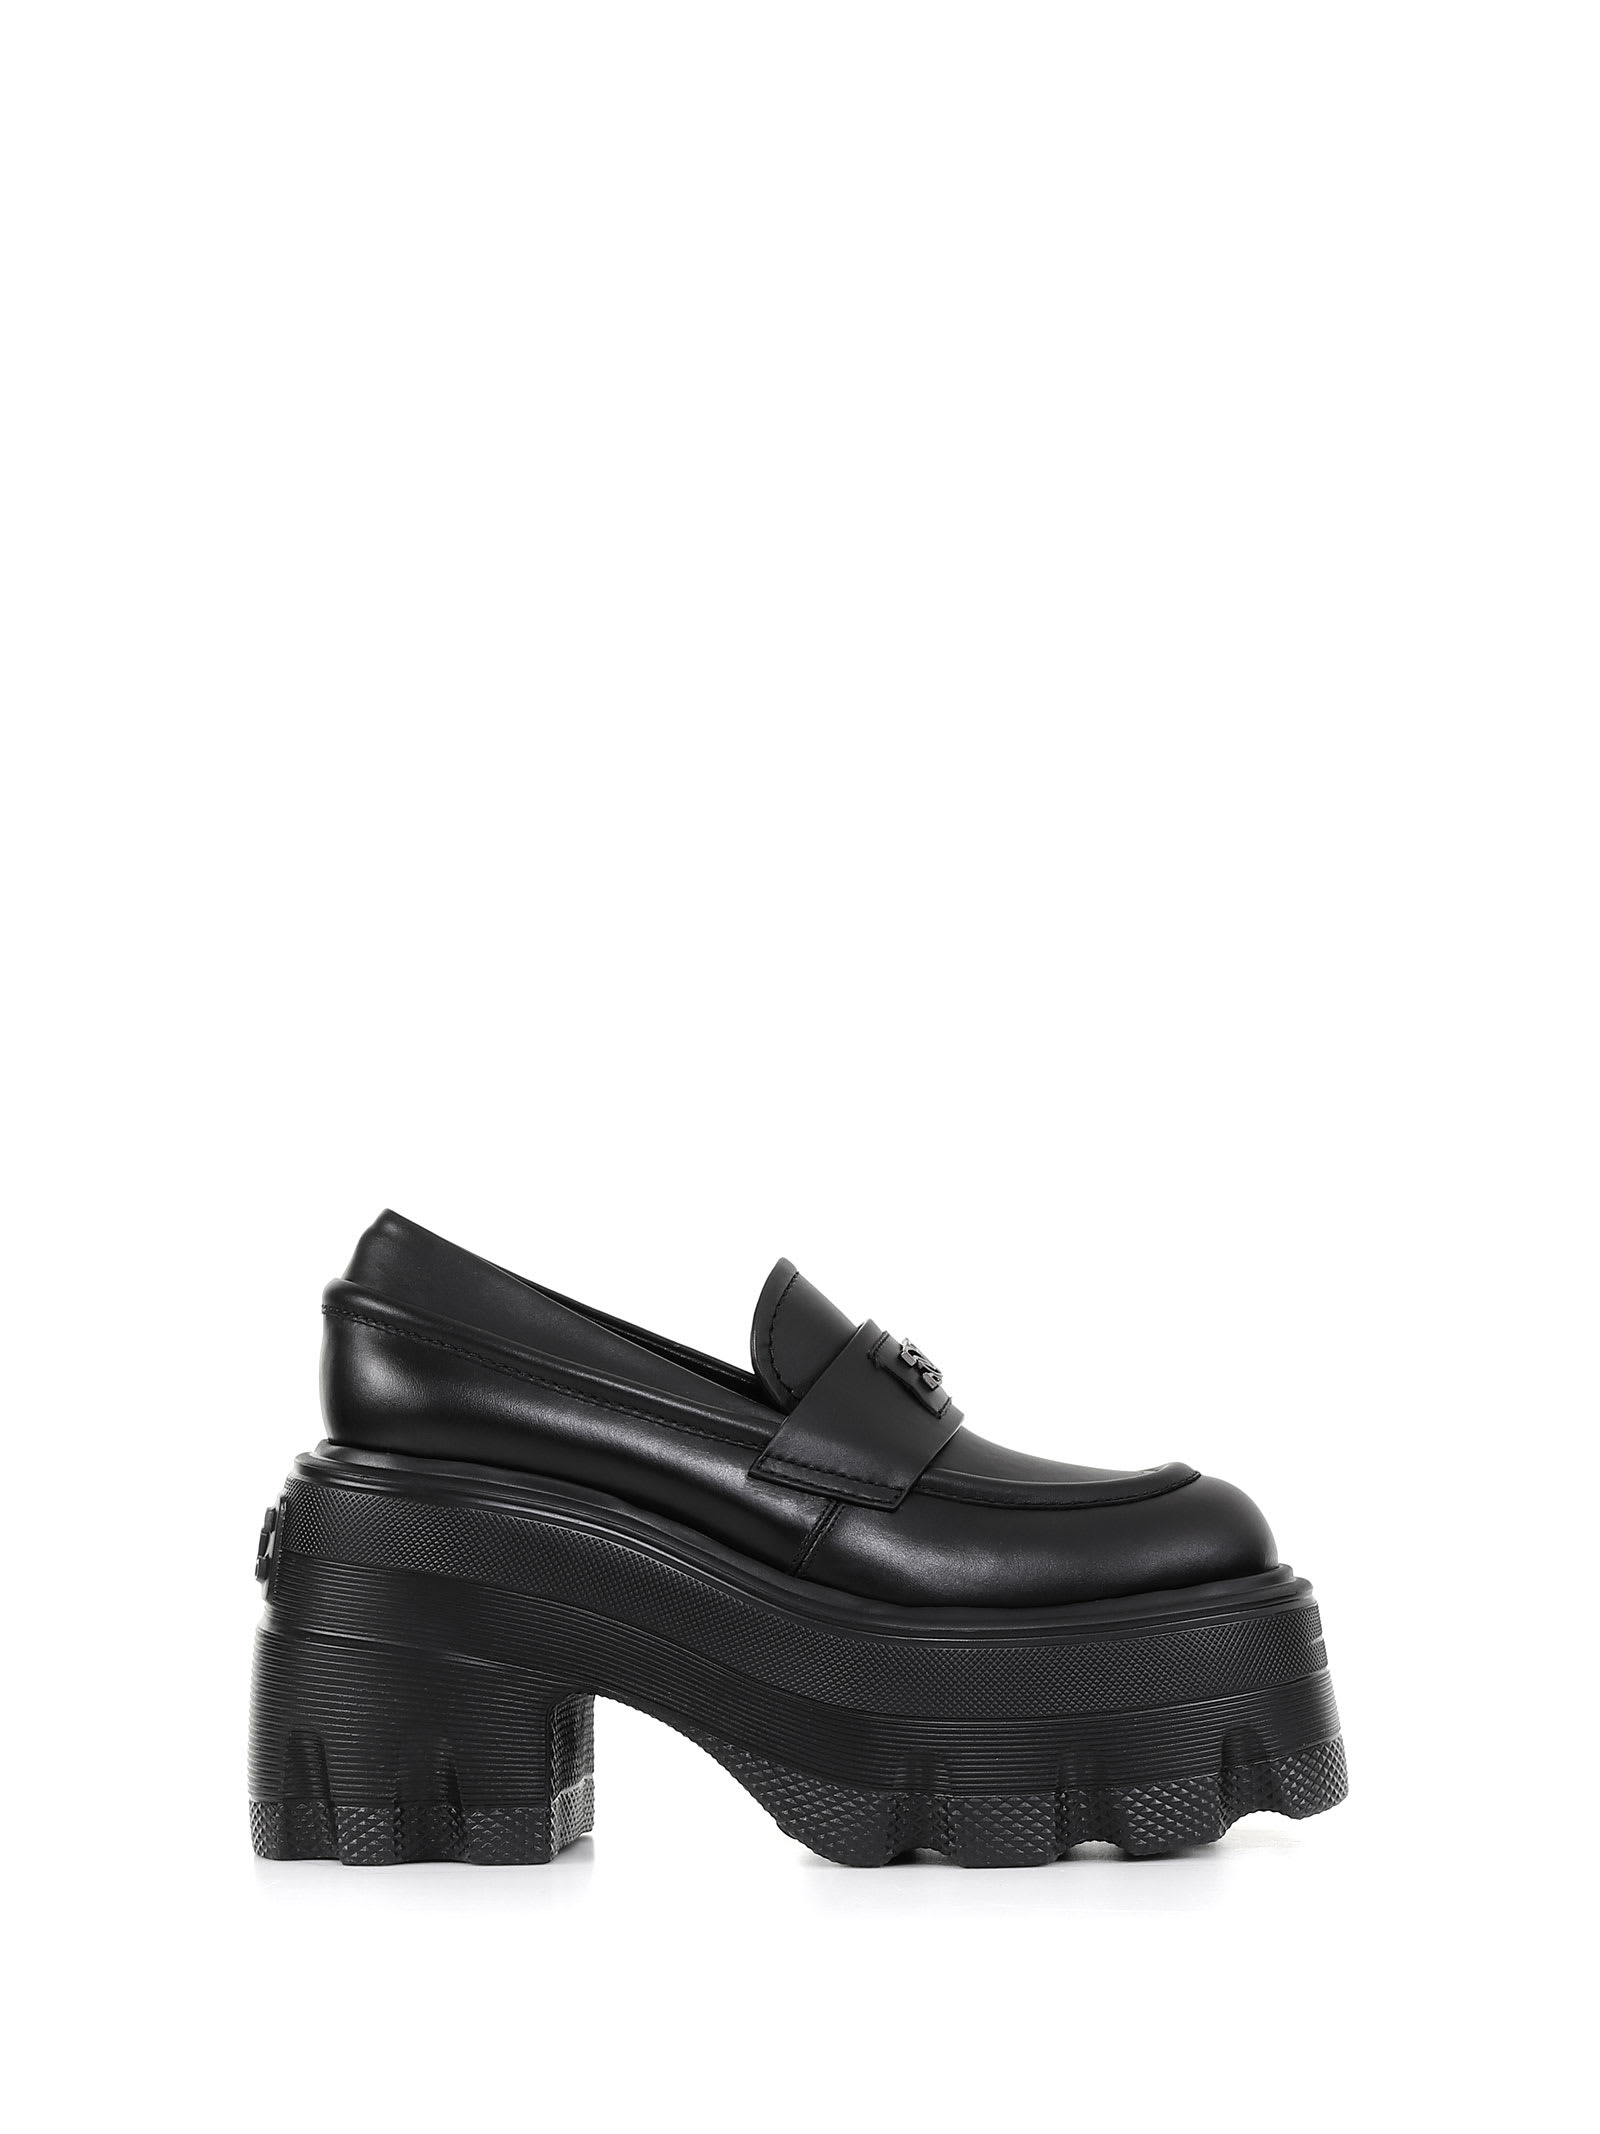 Casadei Loafer With Maxi Sole